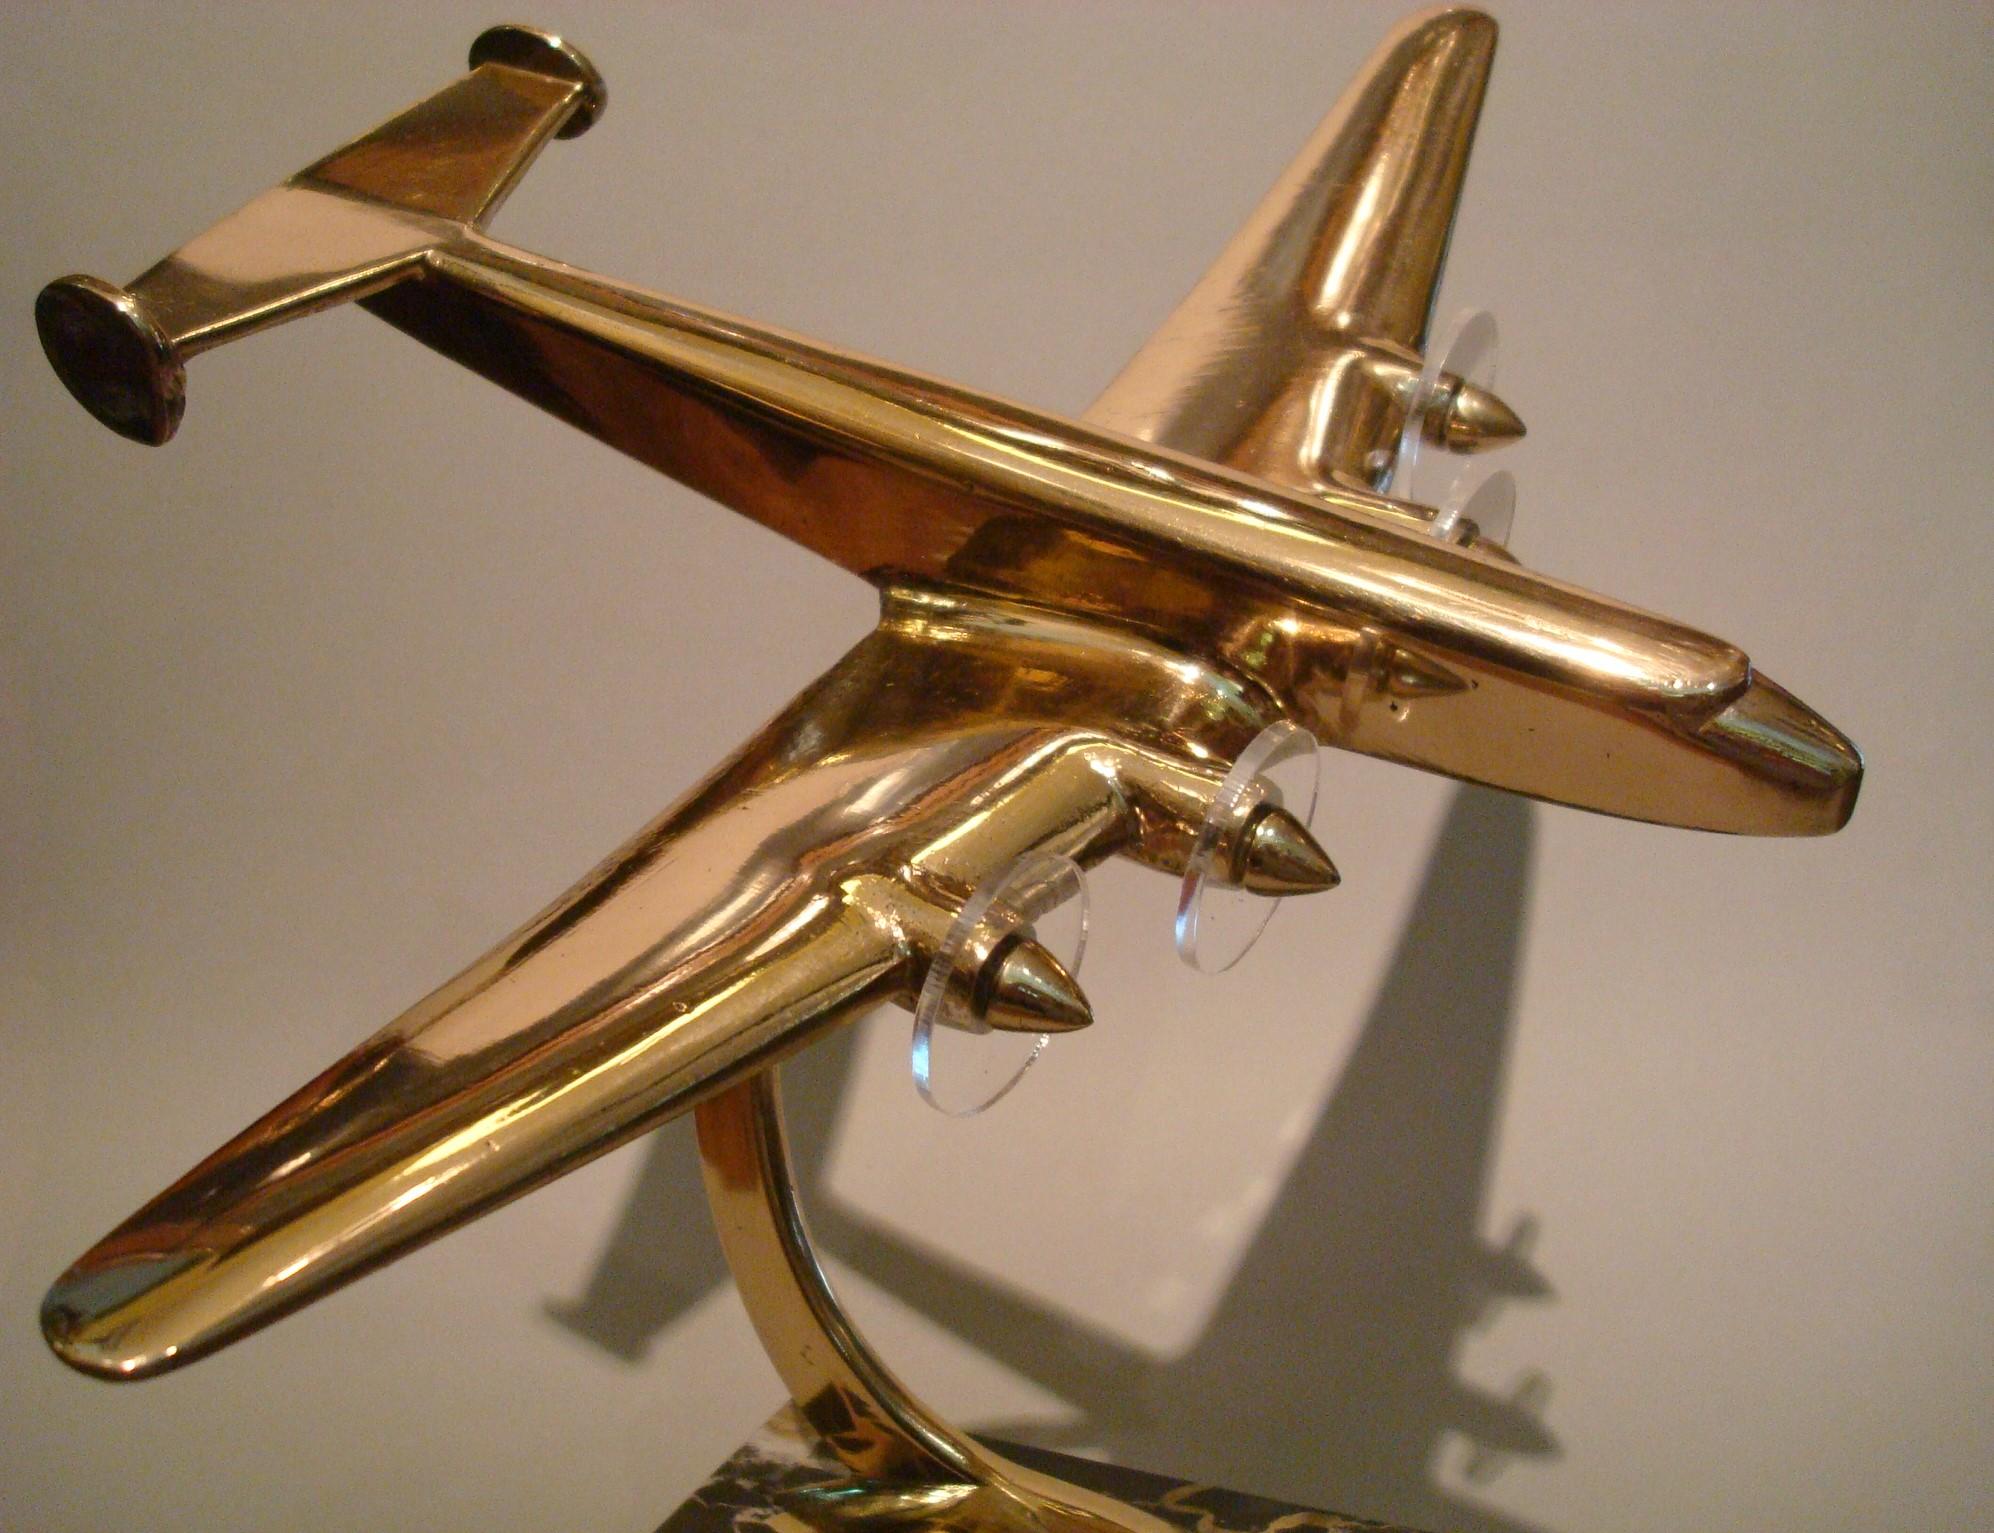 American Art Deco / Midcentury Desk Model Airplane with Marble Base, 1930s